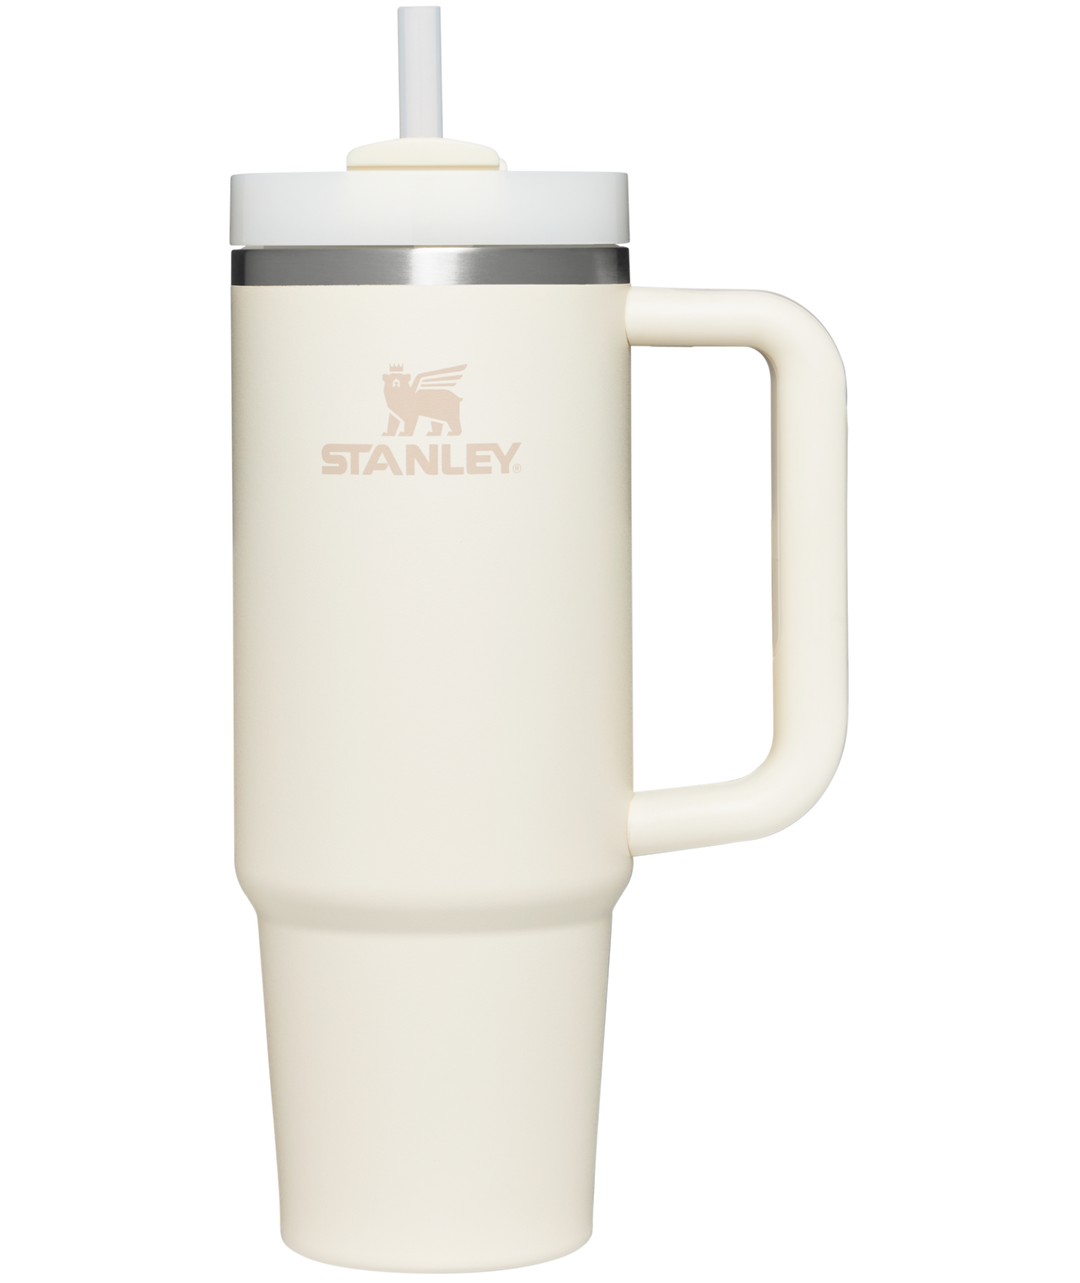 The TikTok famous Stanley Tumbler is back in stock with new colors and  features